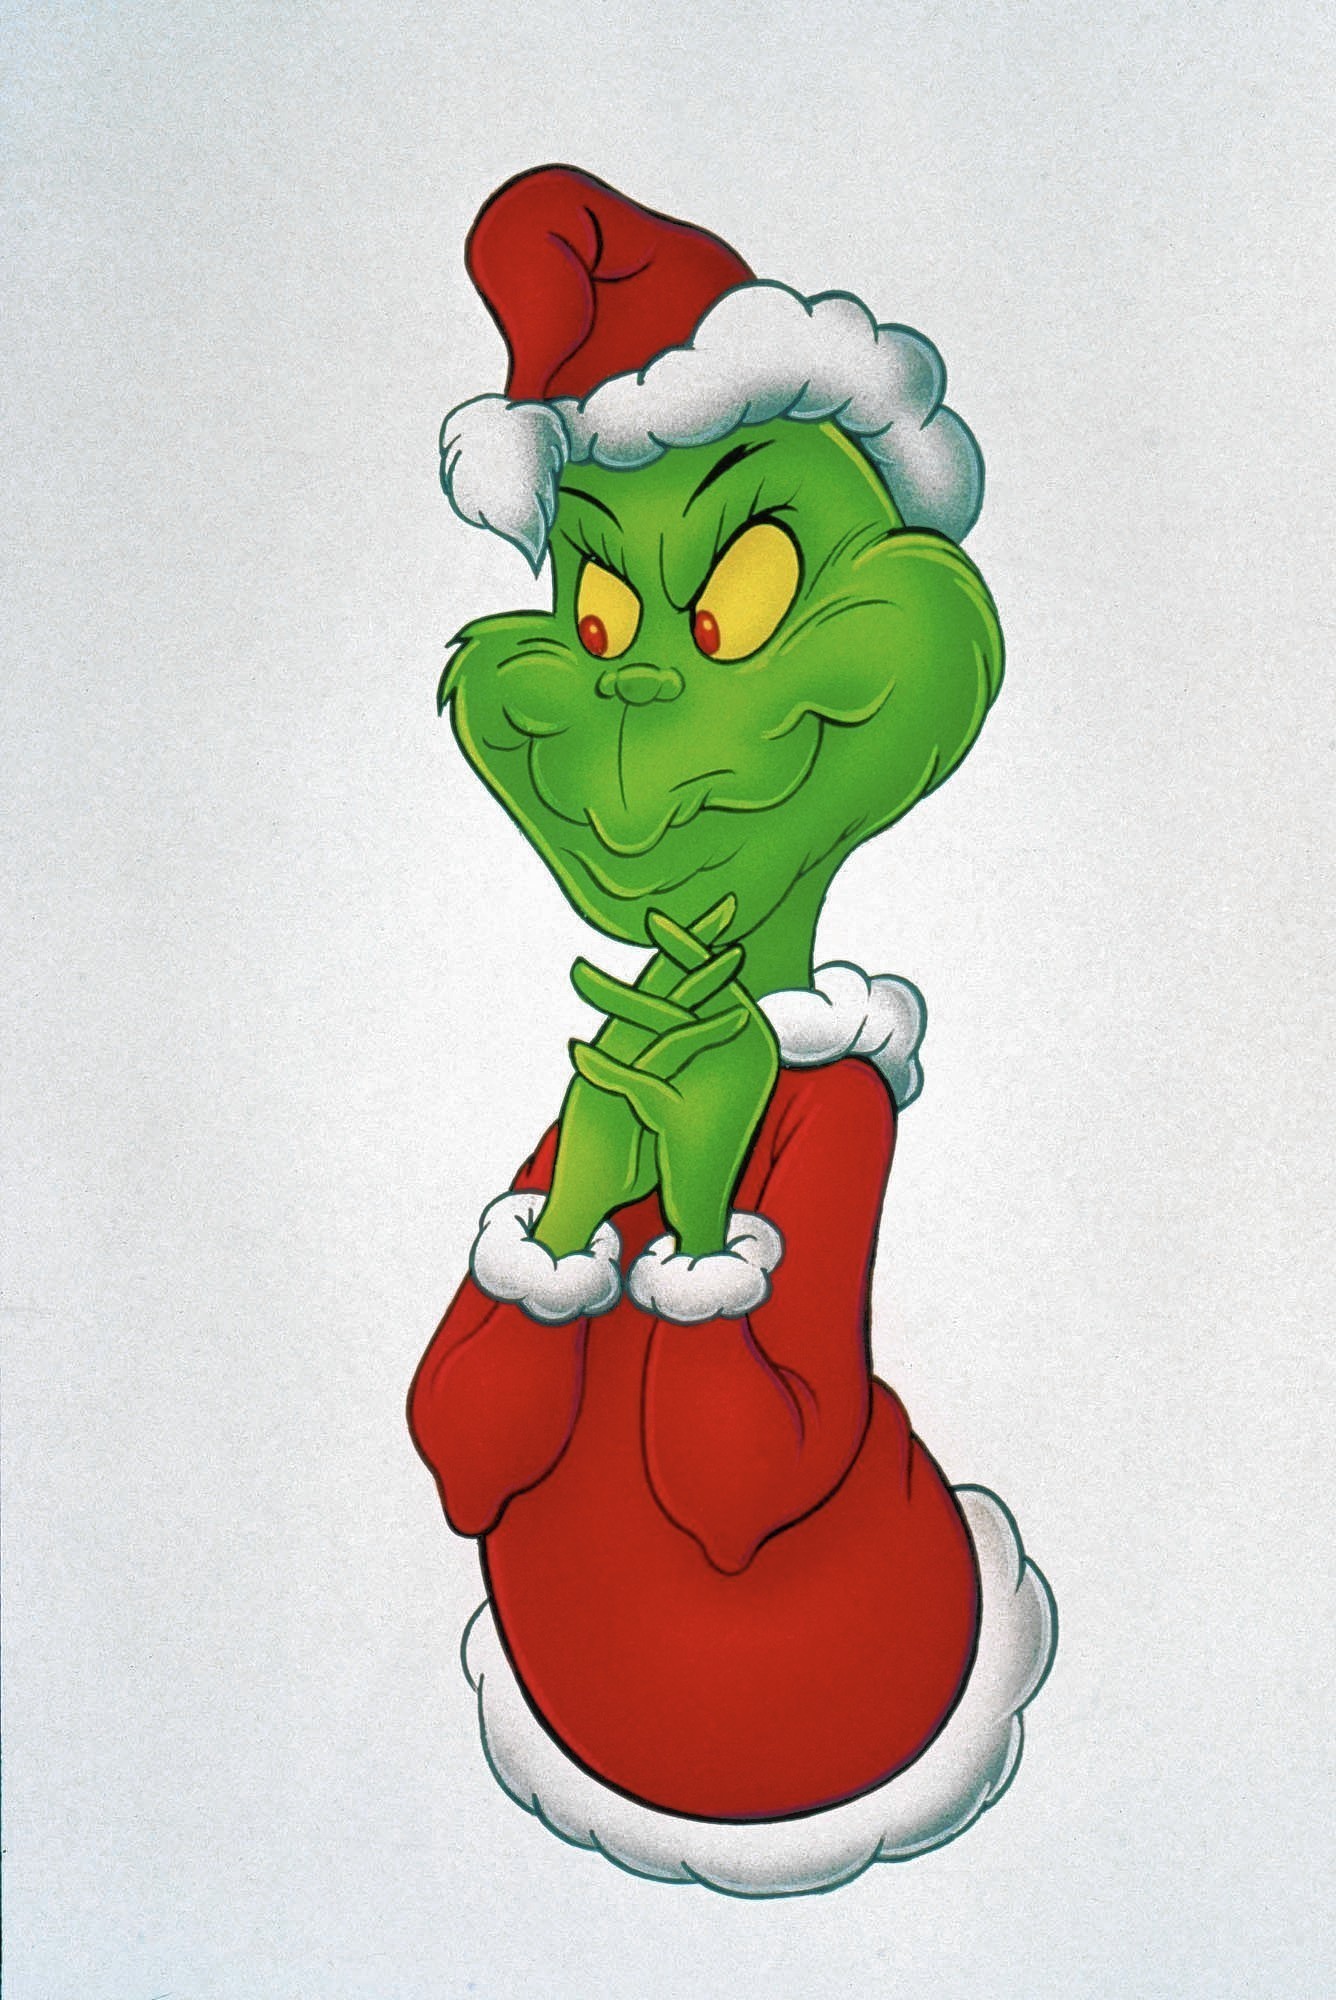 Is your boss a Grinch? Here's how employers treat workers during the